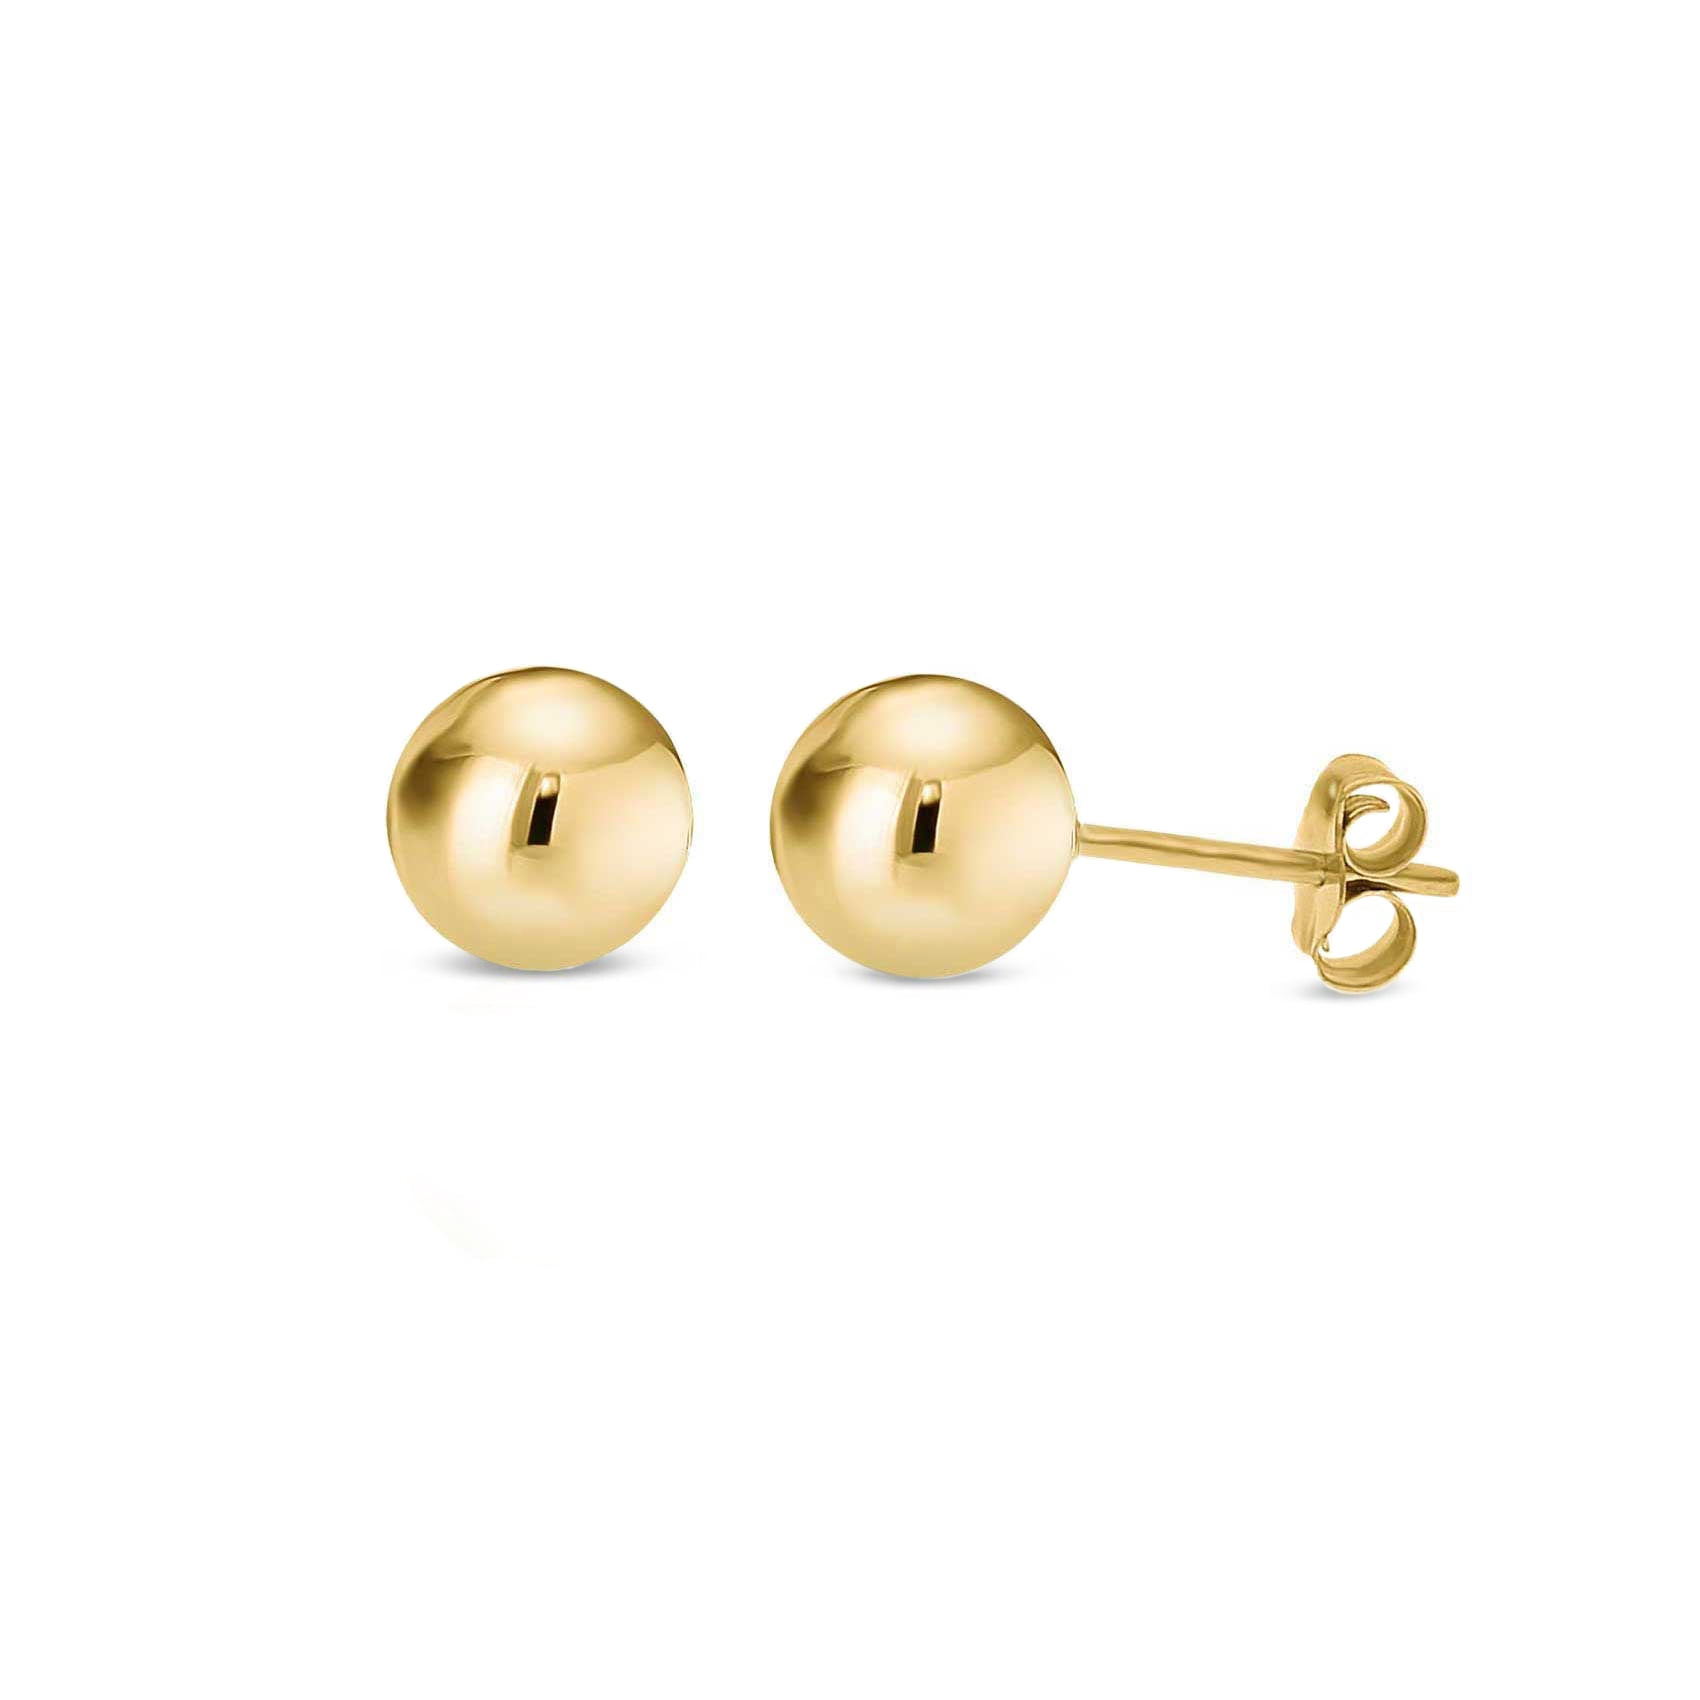 Details about   Solid Real 14k Yellow Gold Polished Round Stud Earrings Womens Girls